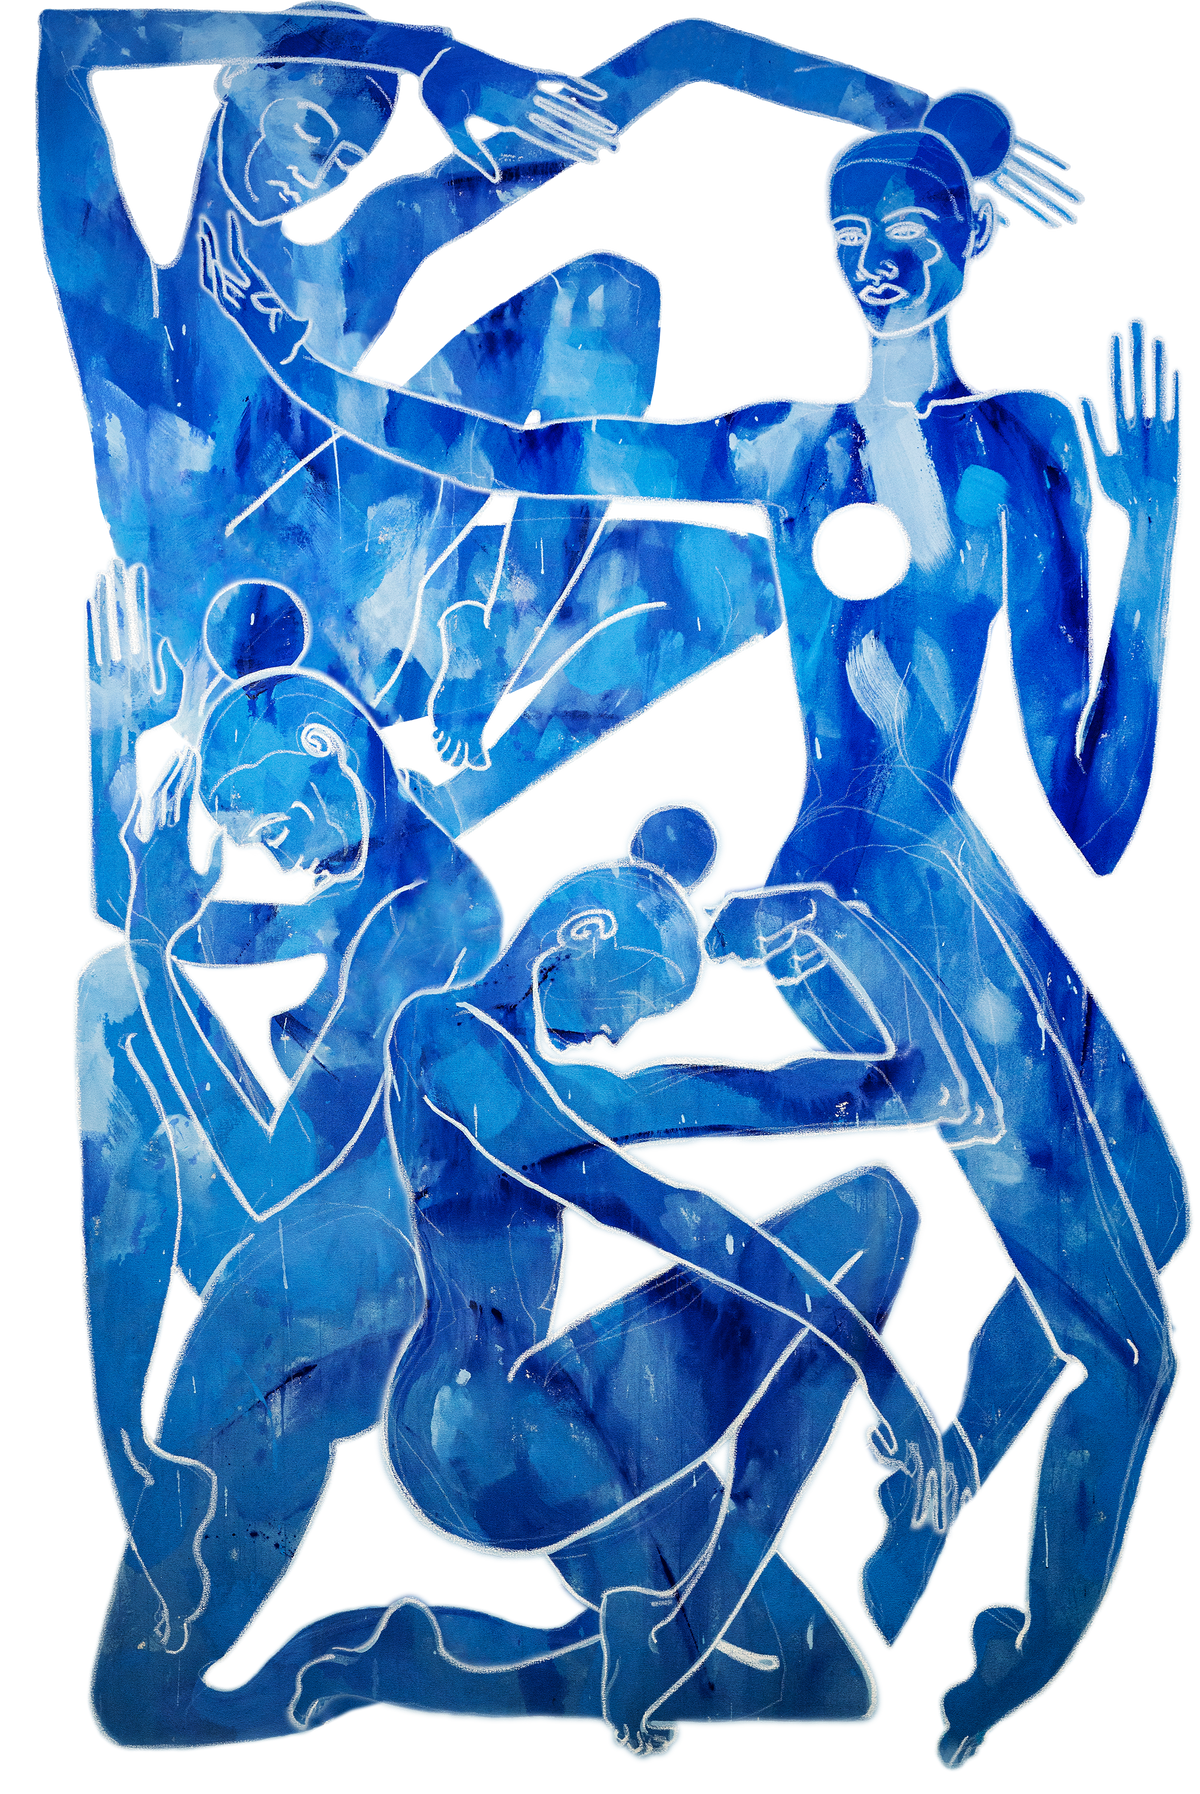 Illustration of abstracted idealized female forms with deep blue painterly fills